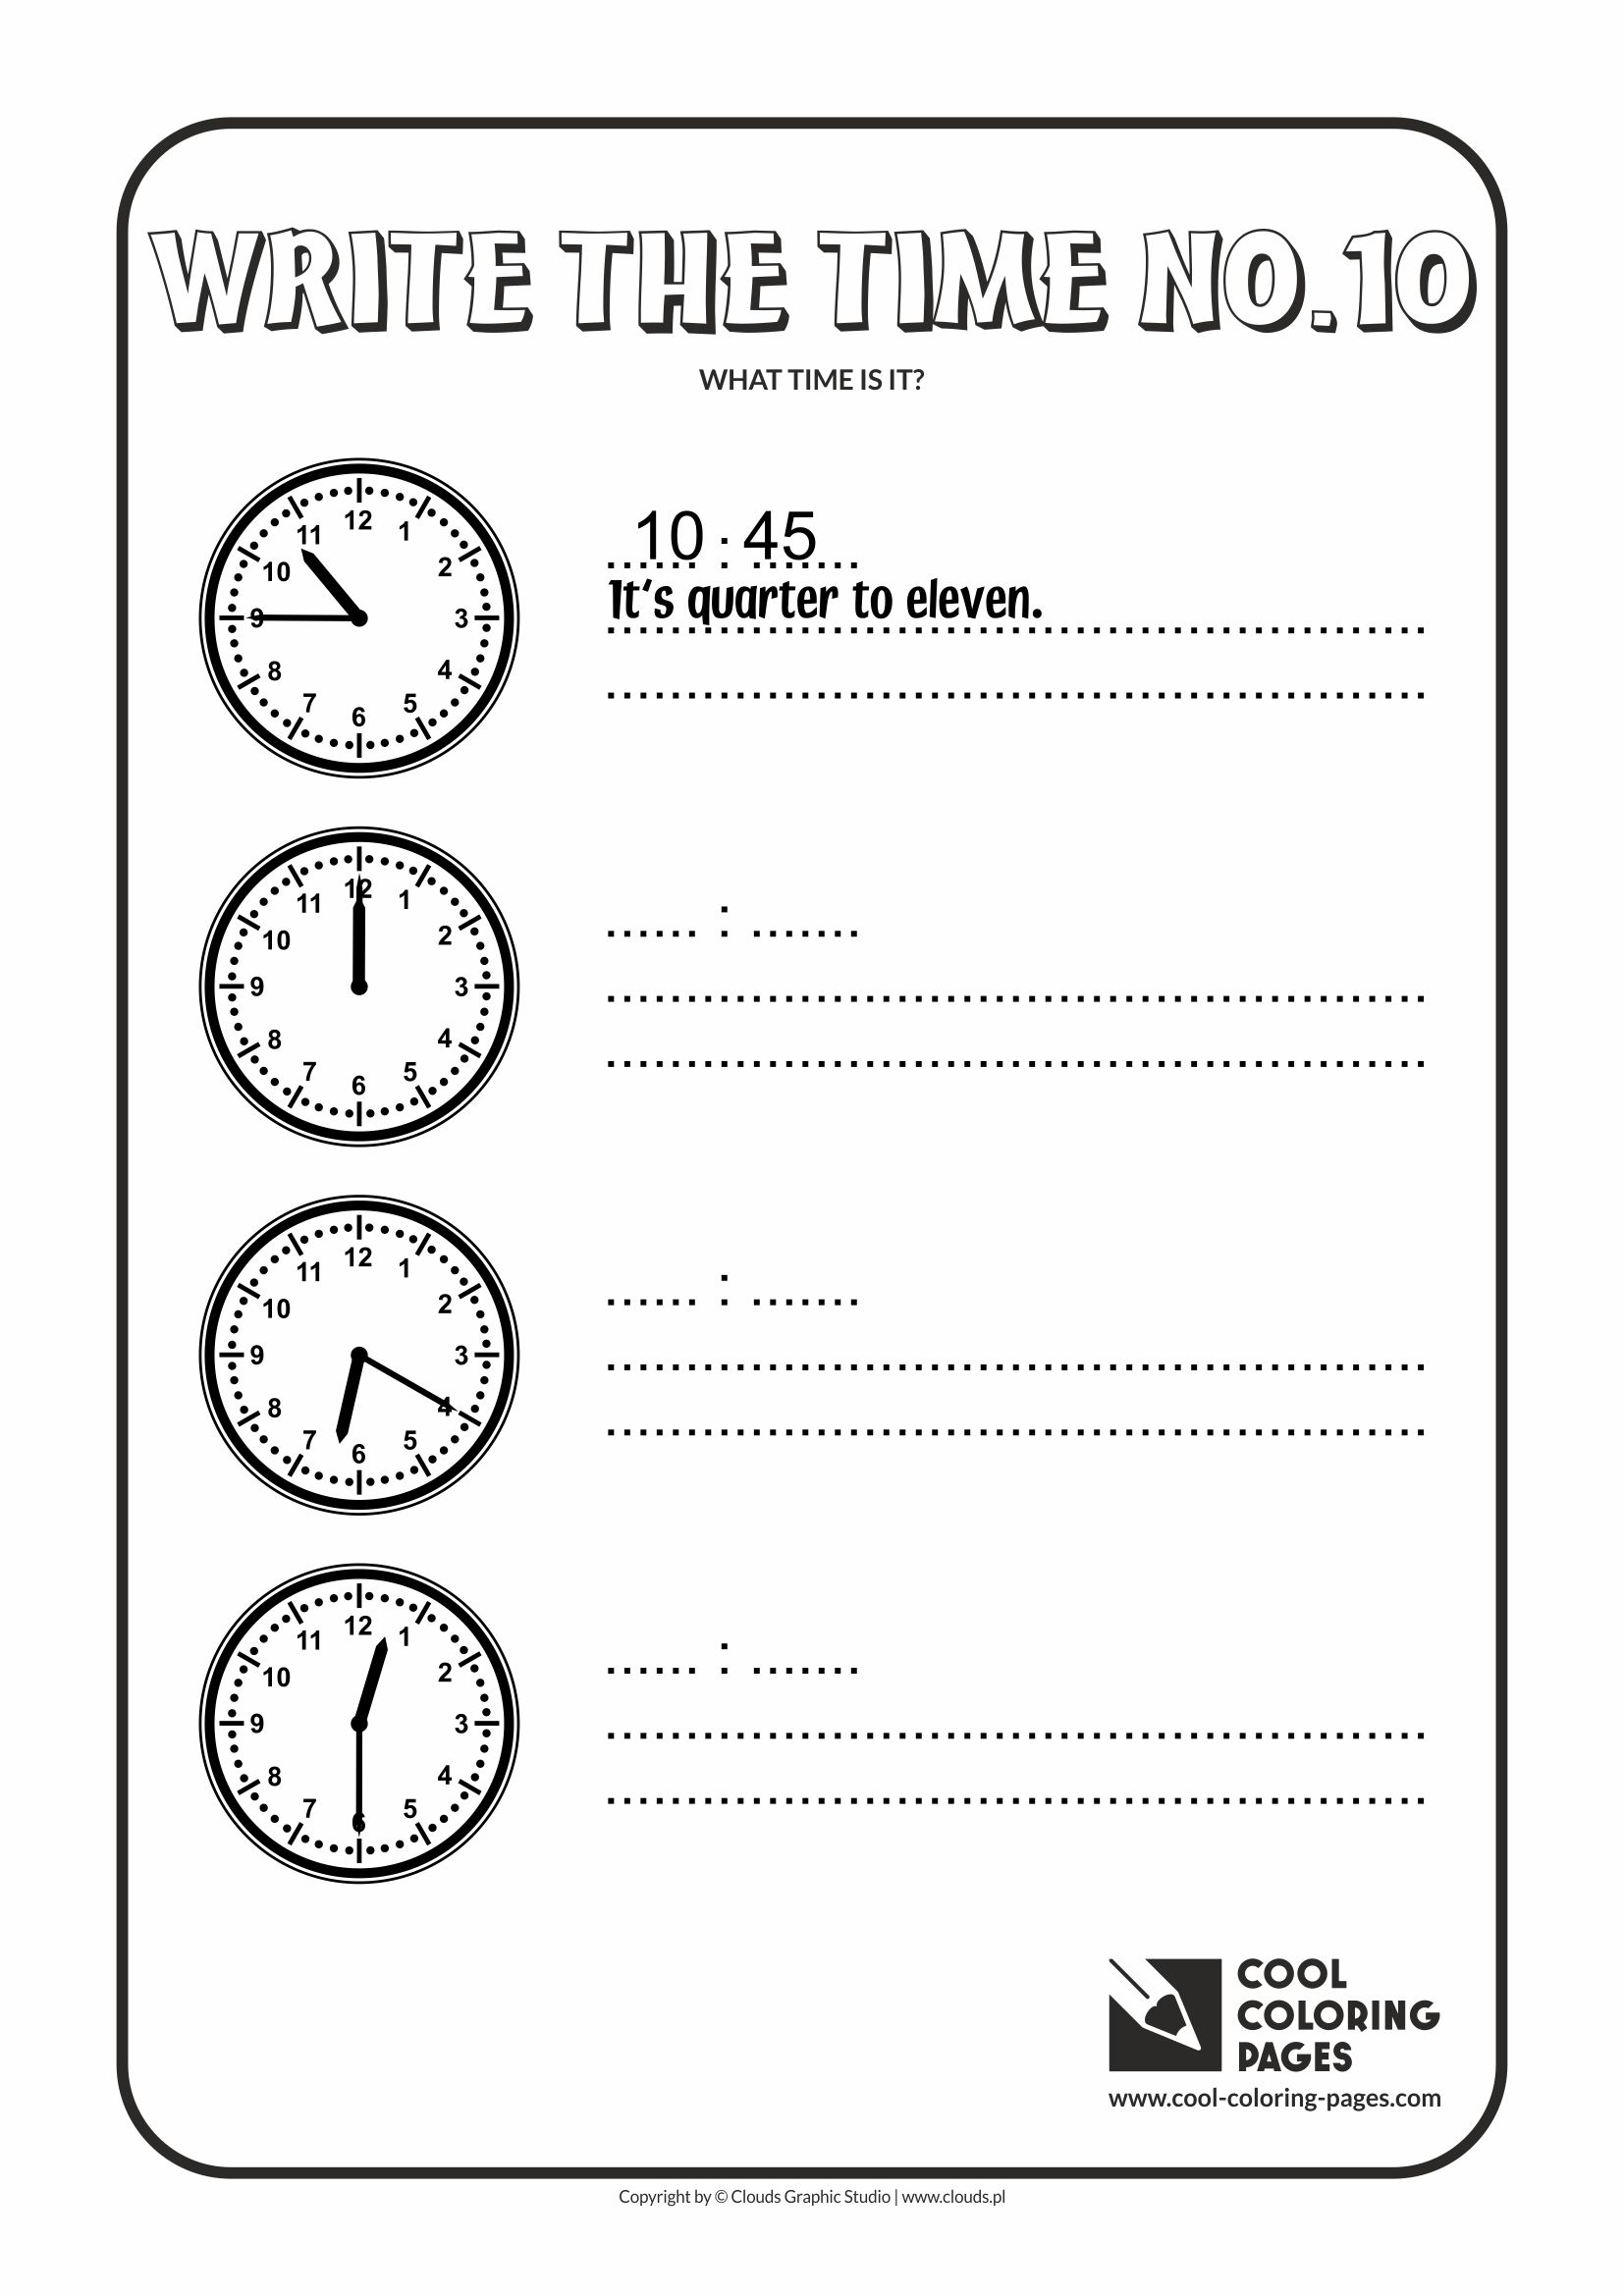 Cool Coloring Pages - Time / Write the time no.10